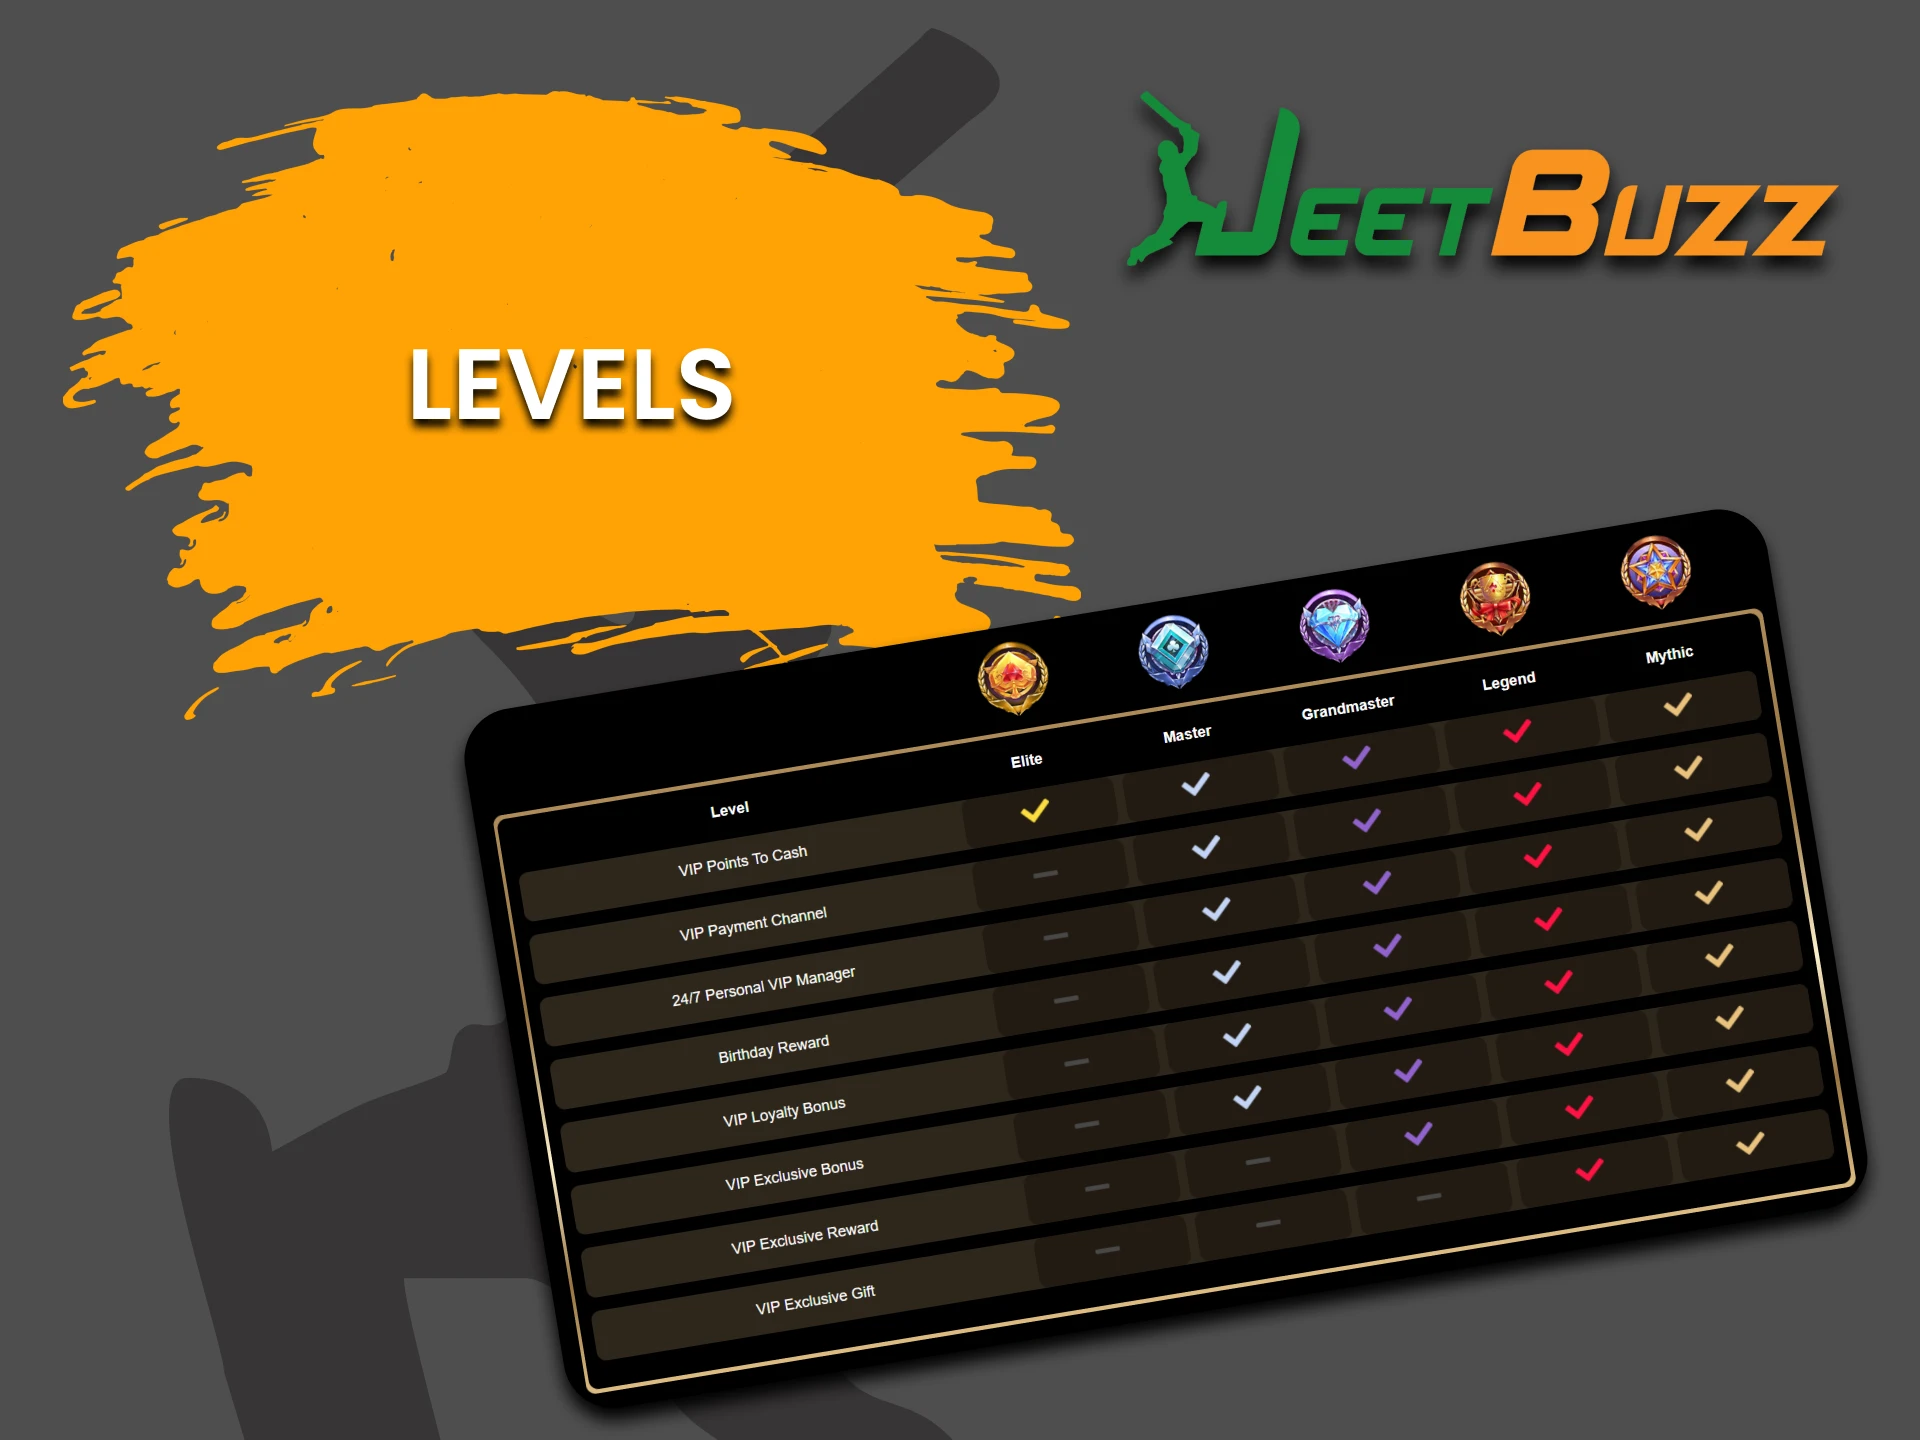 We will tell you what levels are in JeetBuzz VIP Club.